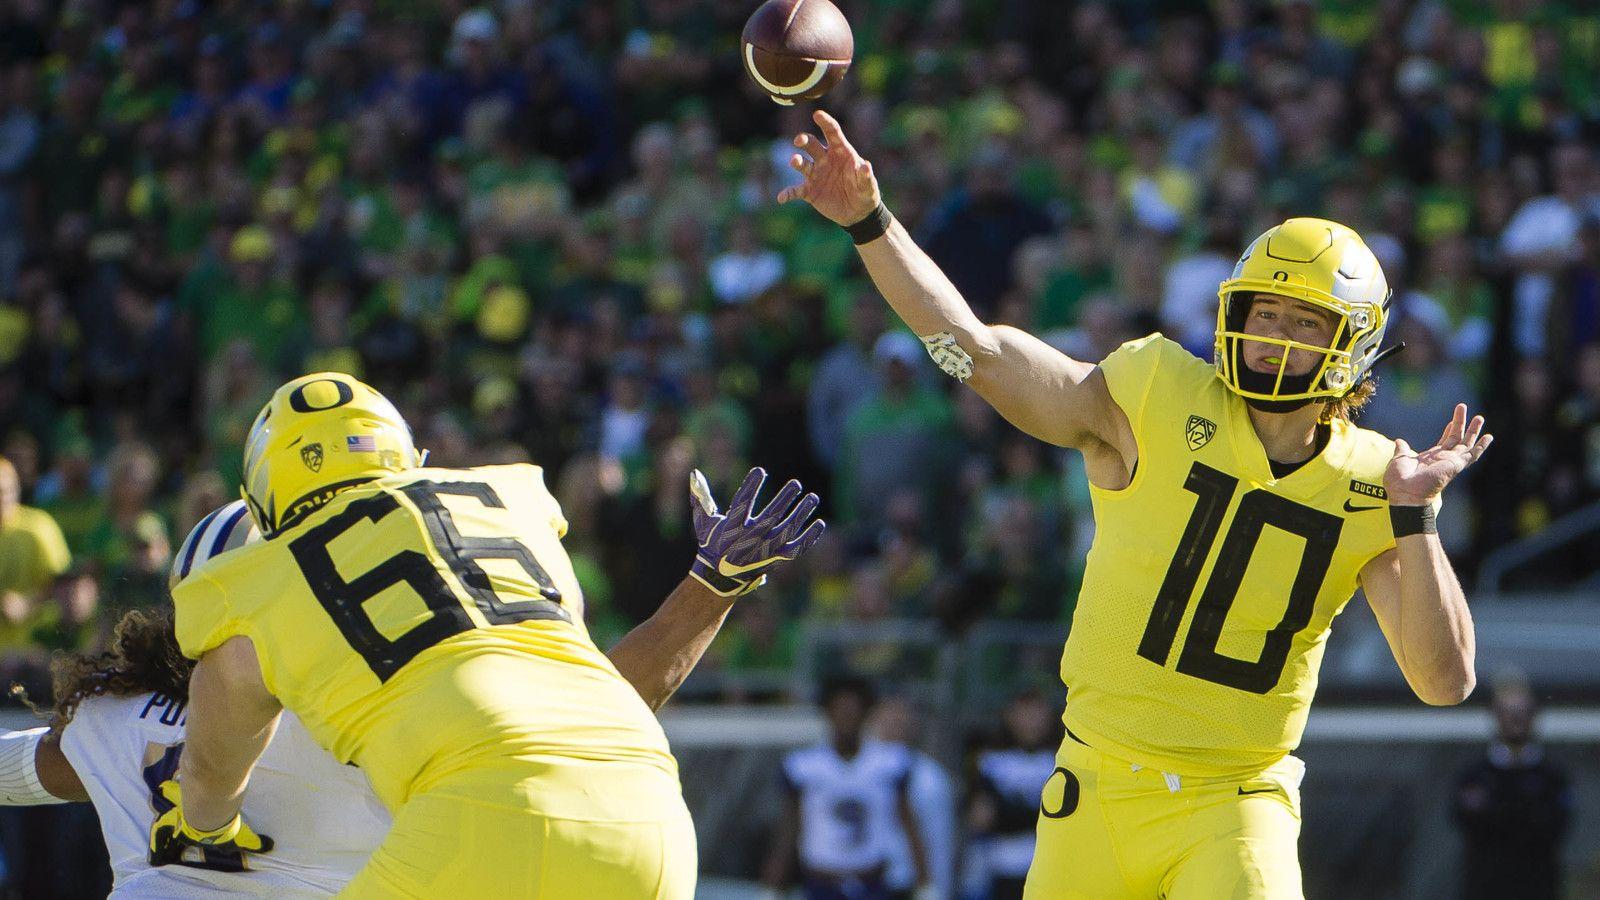 Watch: Justin Herbert shows why NFL scouts are drooling